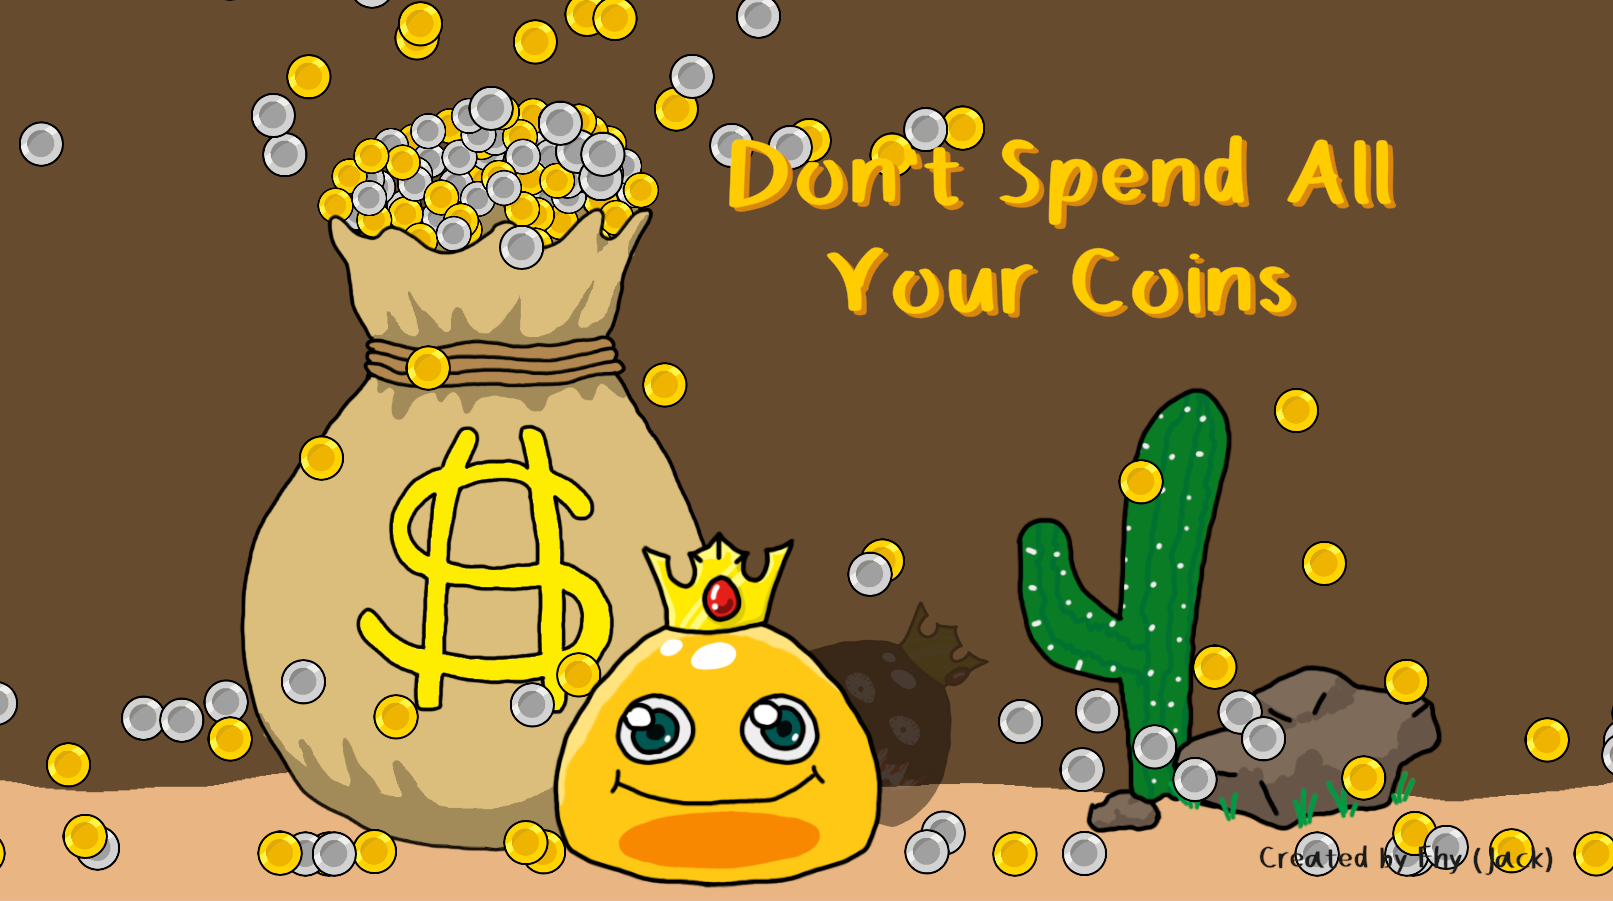 Don't Spend All Your Coins